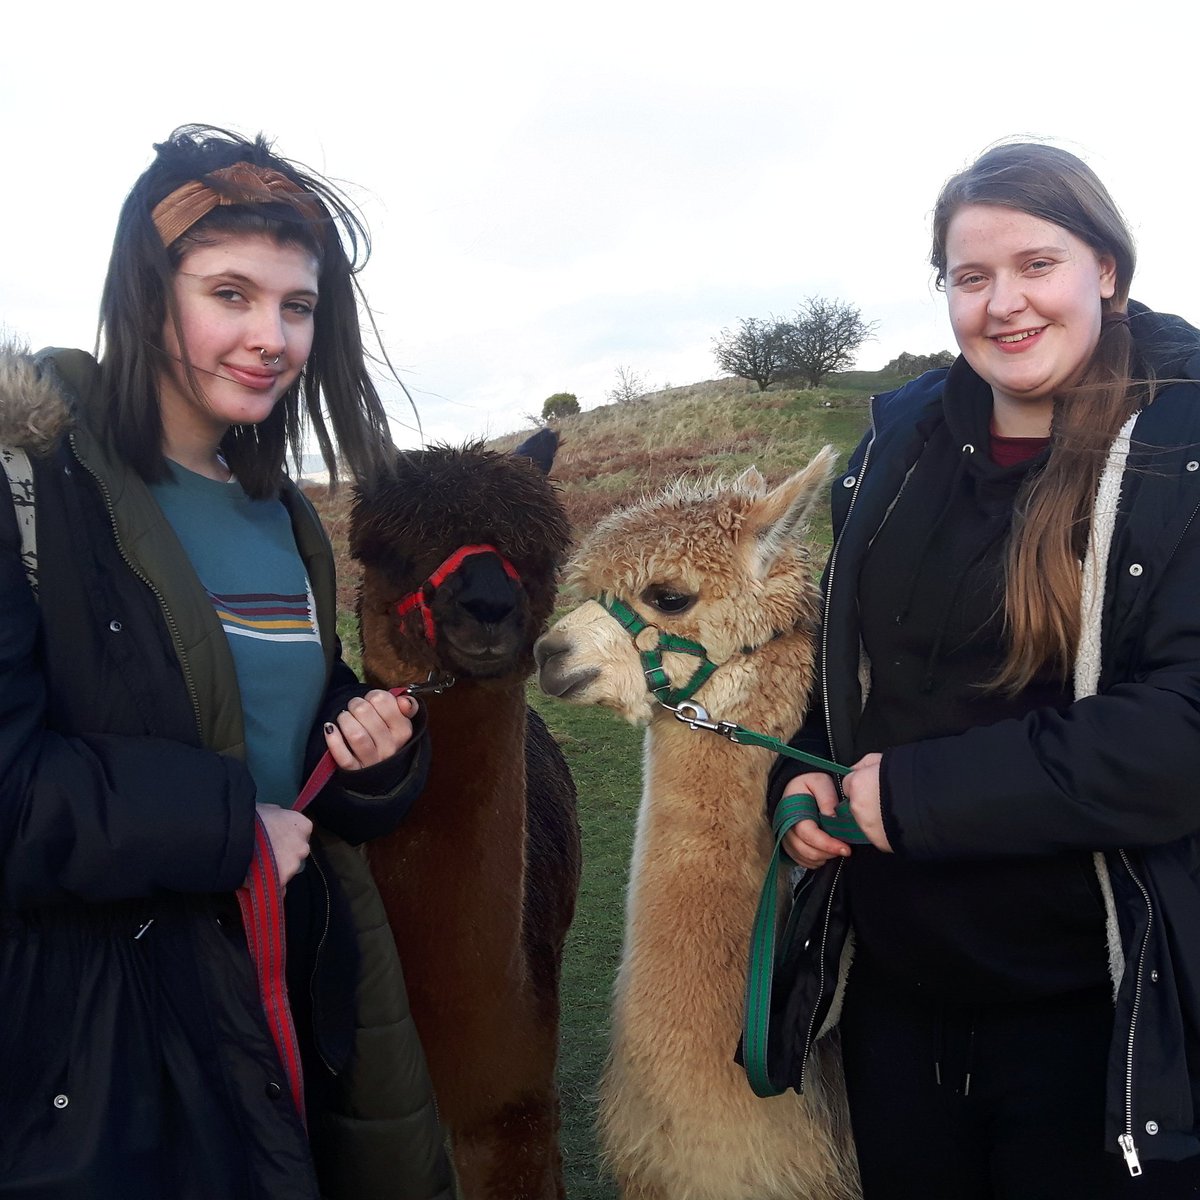 A break in the weather so off we go!! Kayleigh and Charlie enjoyed some blue sky and a chilled walk with Carmelo and Jura.
#cutealpacas #alpacatrekking #alpacatherapy #alpacaexperience #kendal #lakeland #lakedistrict #cumbria